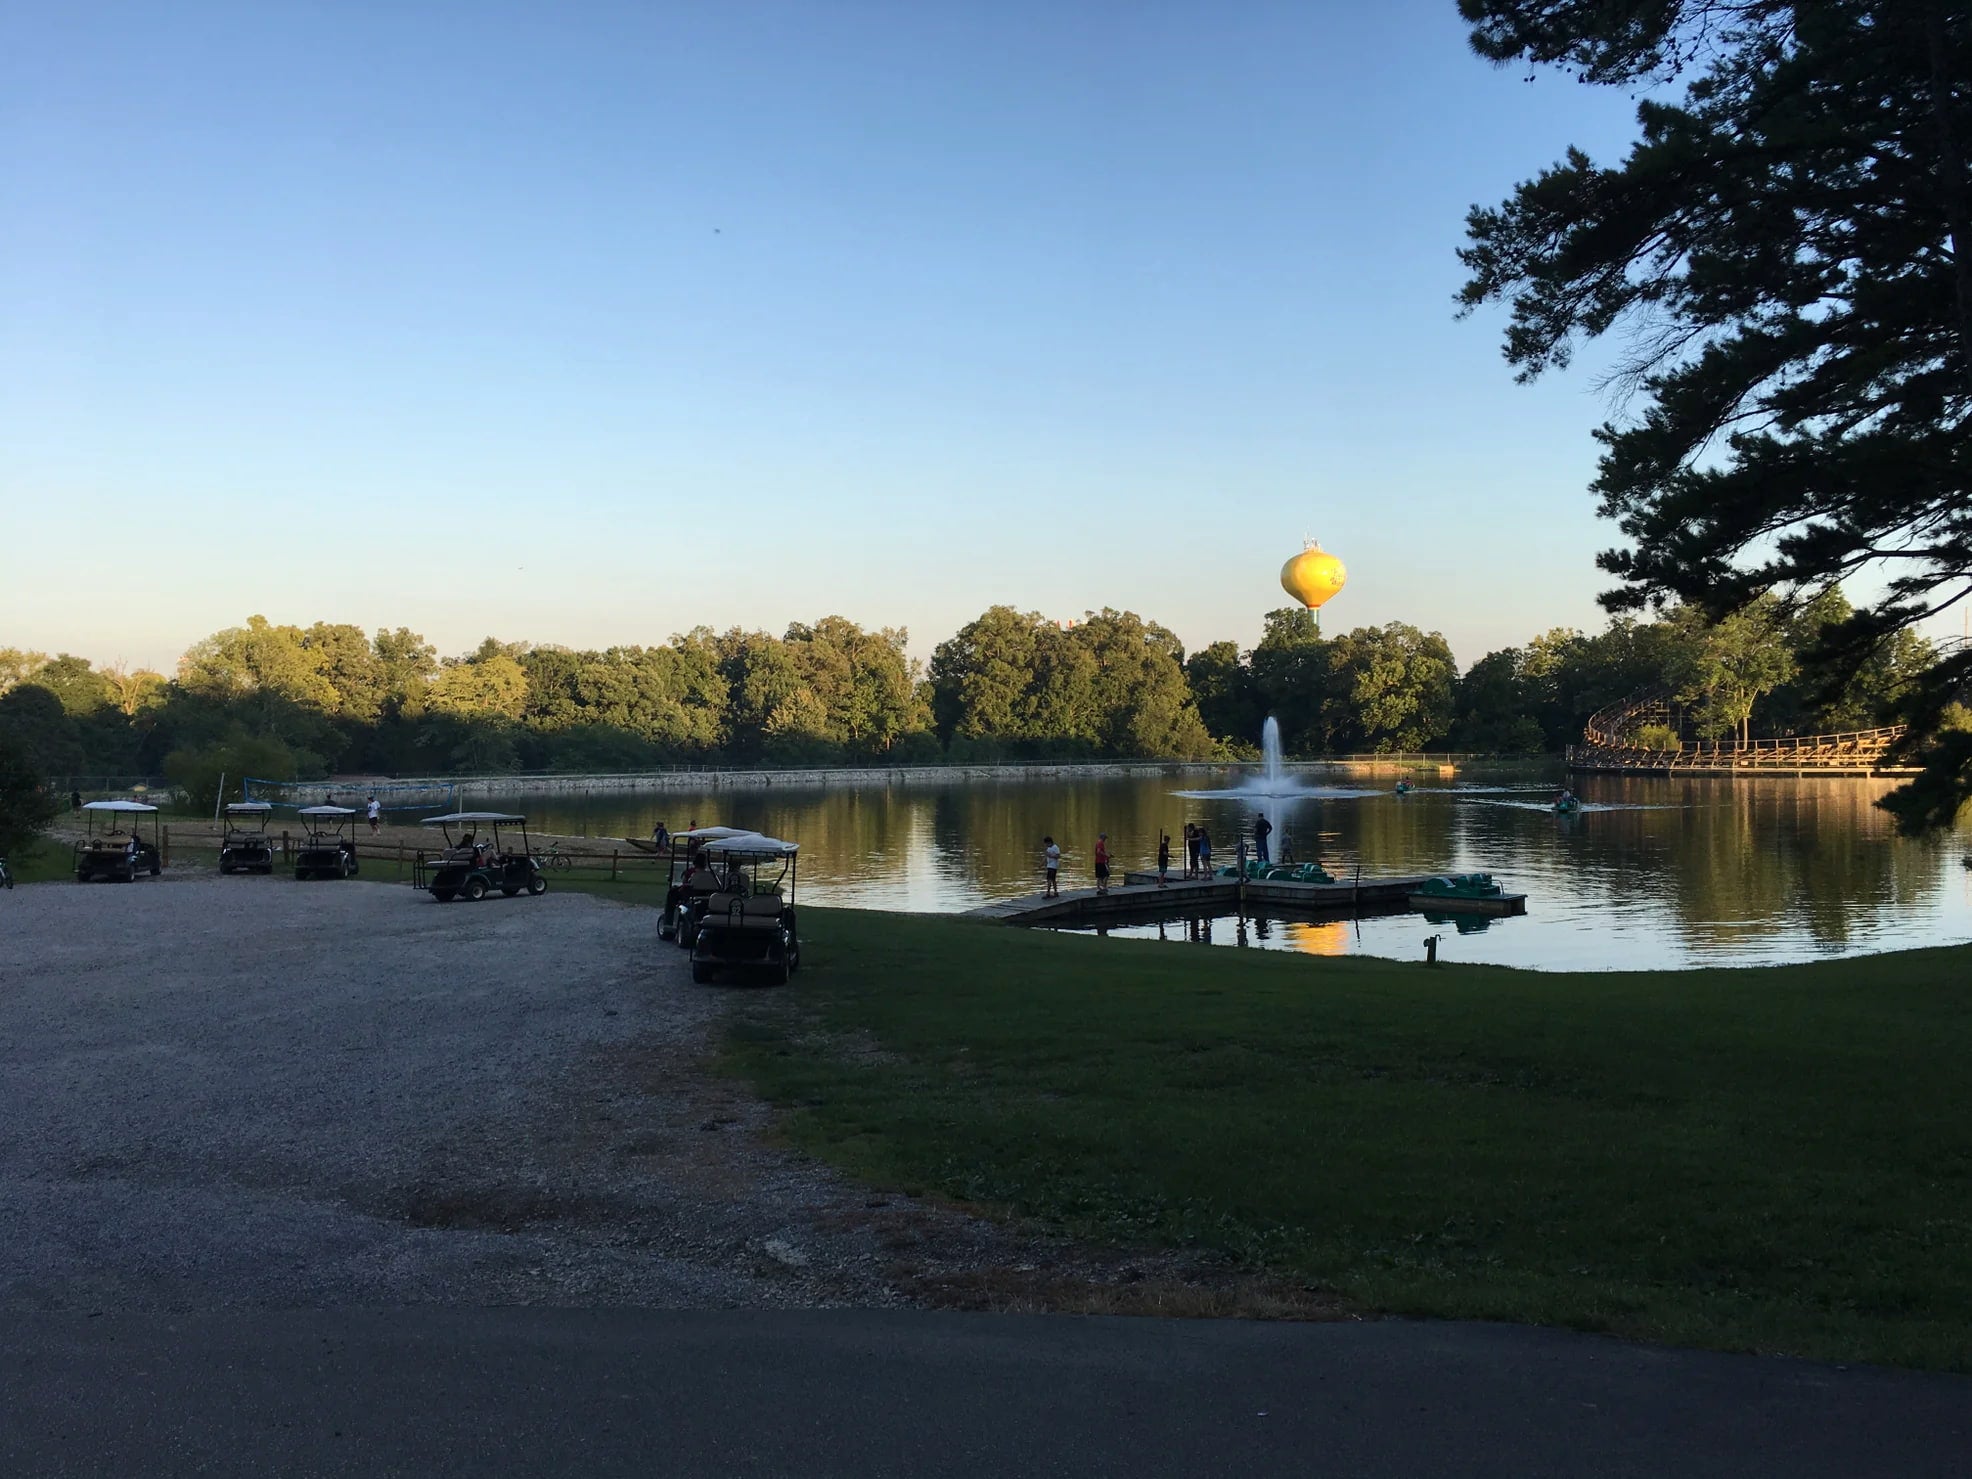 Campsite on lake with amusement park, dock, golfcarts and more.